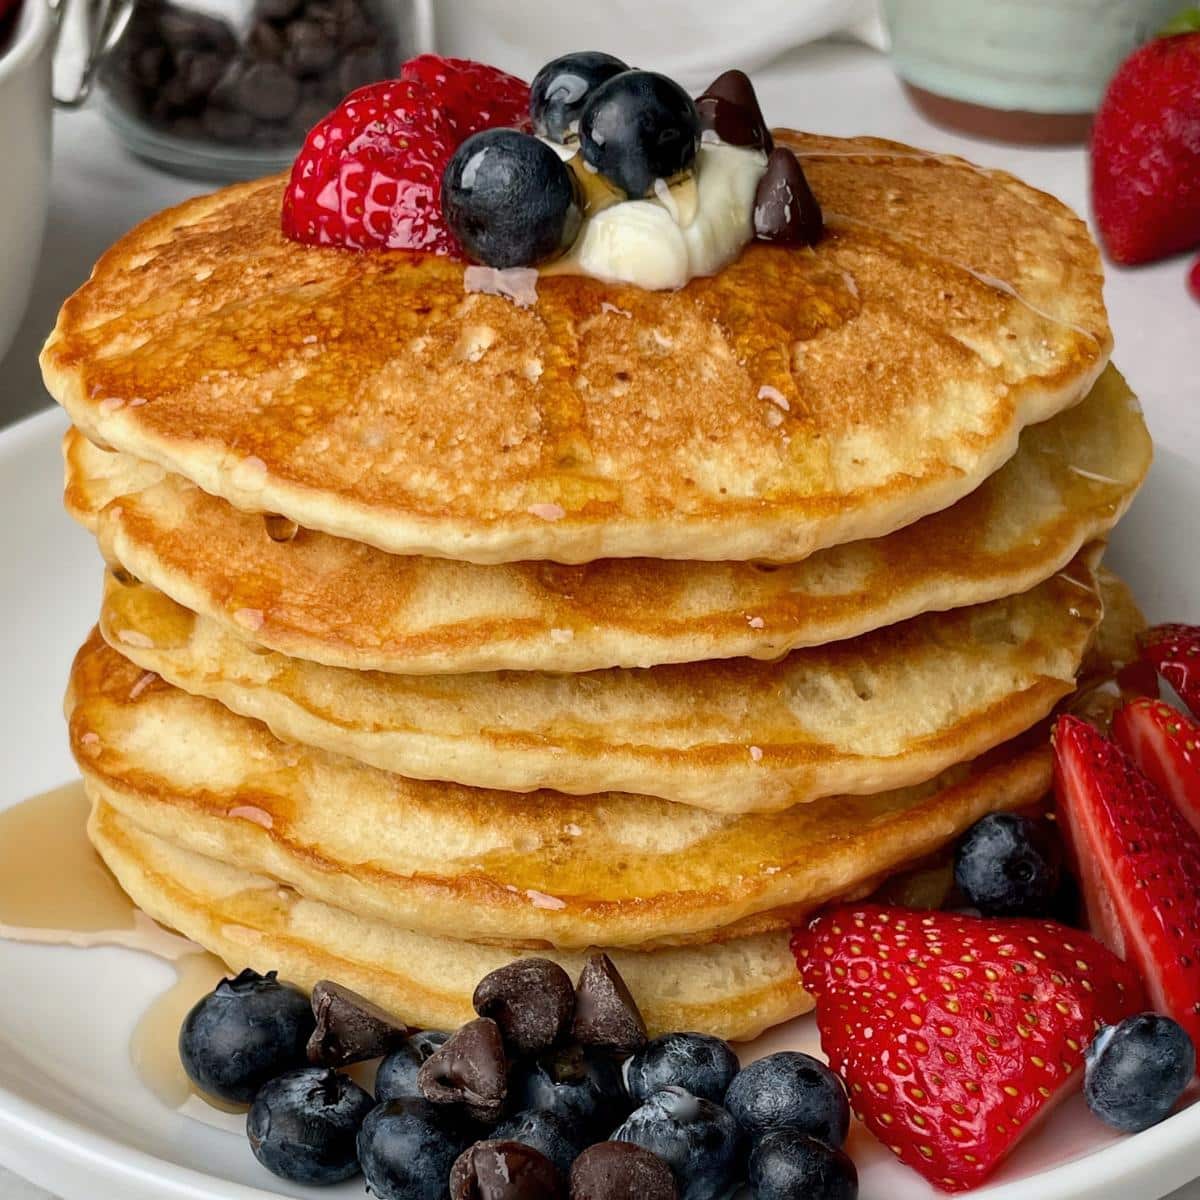 A stack of vegan buttermilk pancakes with syrup and fruit.